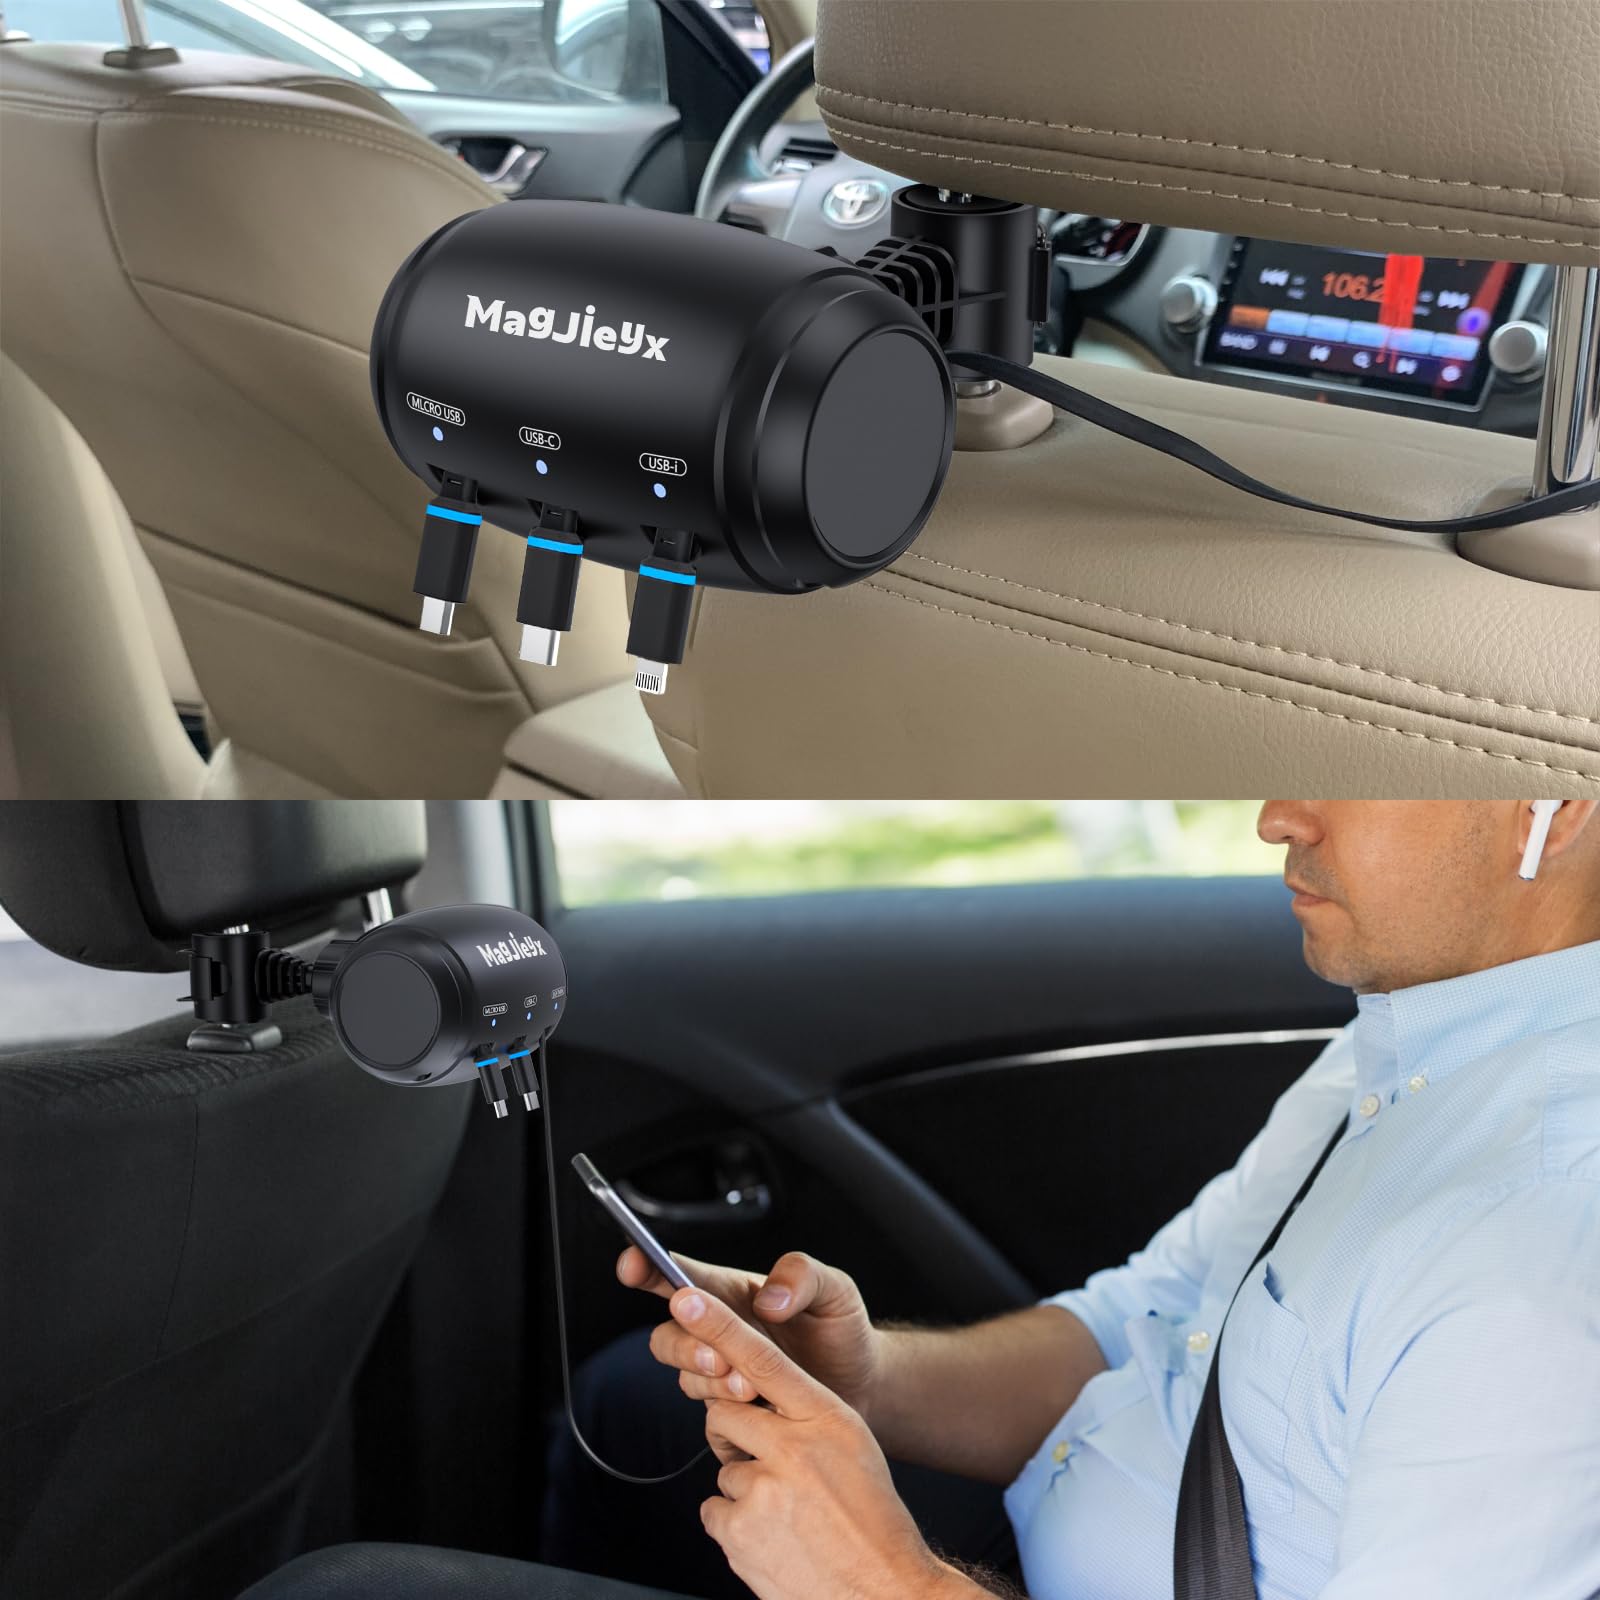 MAGJIEYX for Multi Retractable Car Charging Station Box, 3 in 1 Headrest Fast Power Charging Dock Cord USB Type C Fits iPhone15 14/iPad/Android/Samsung|Uber Lyft Backseat Passengers Share Rid